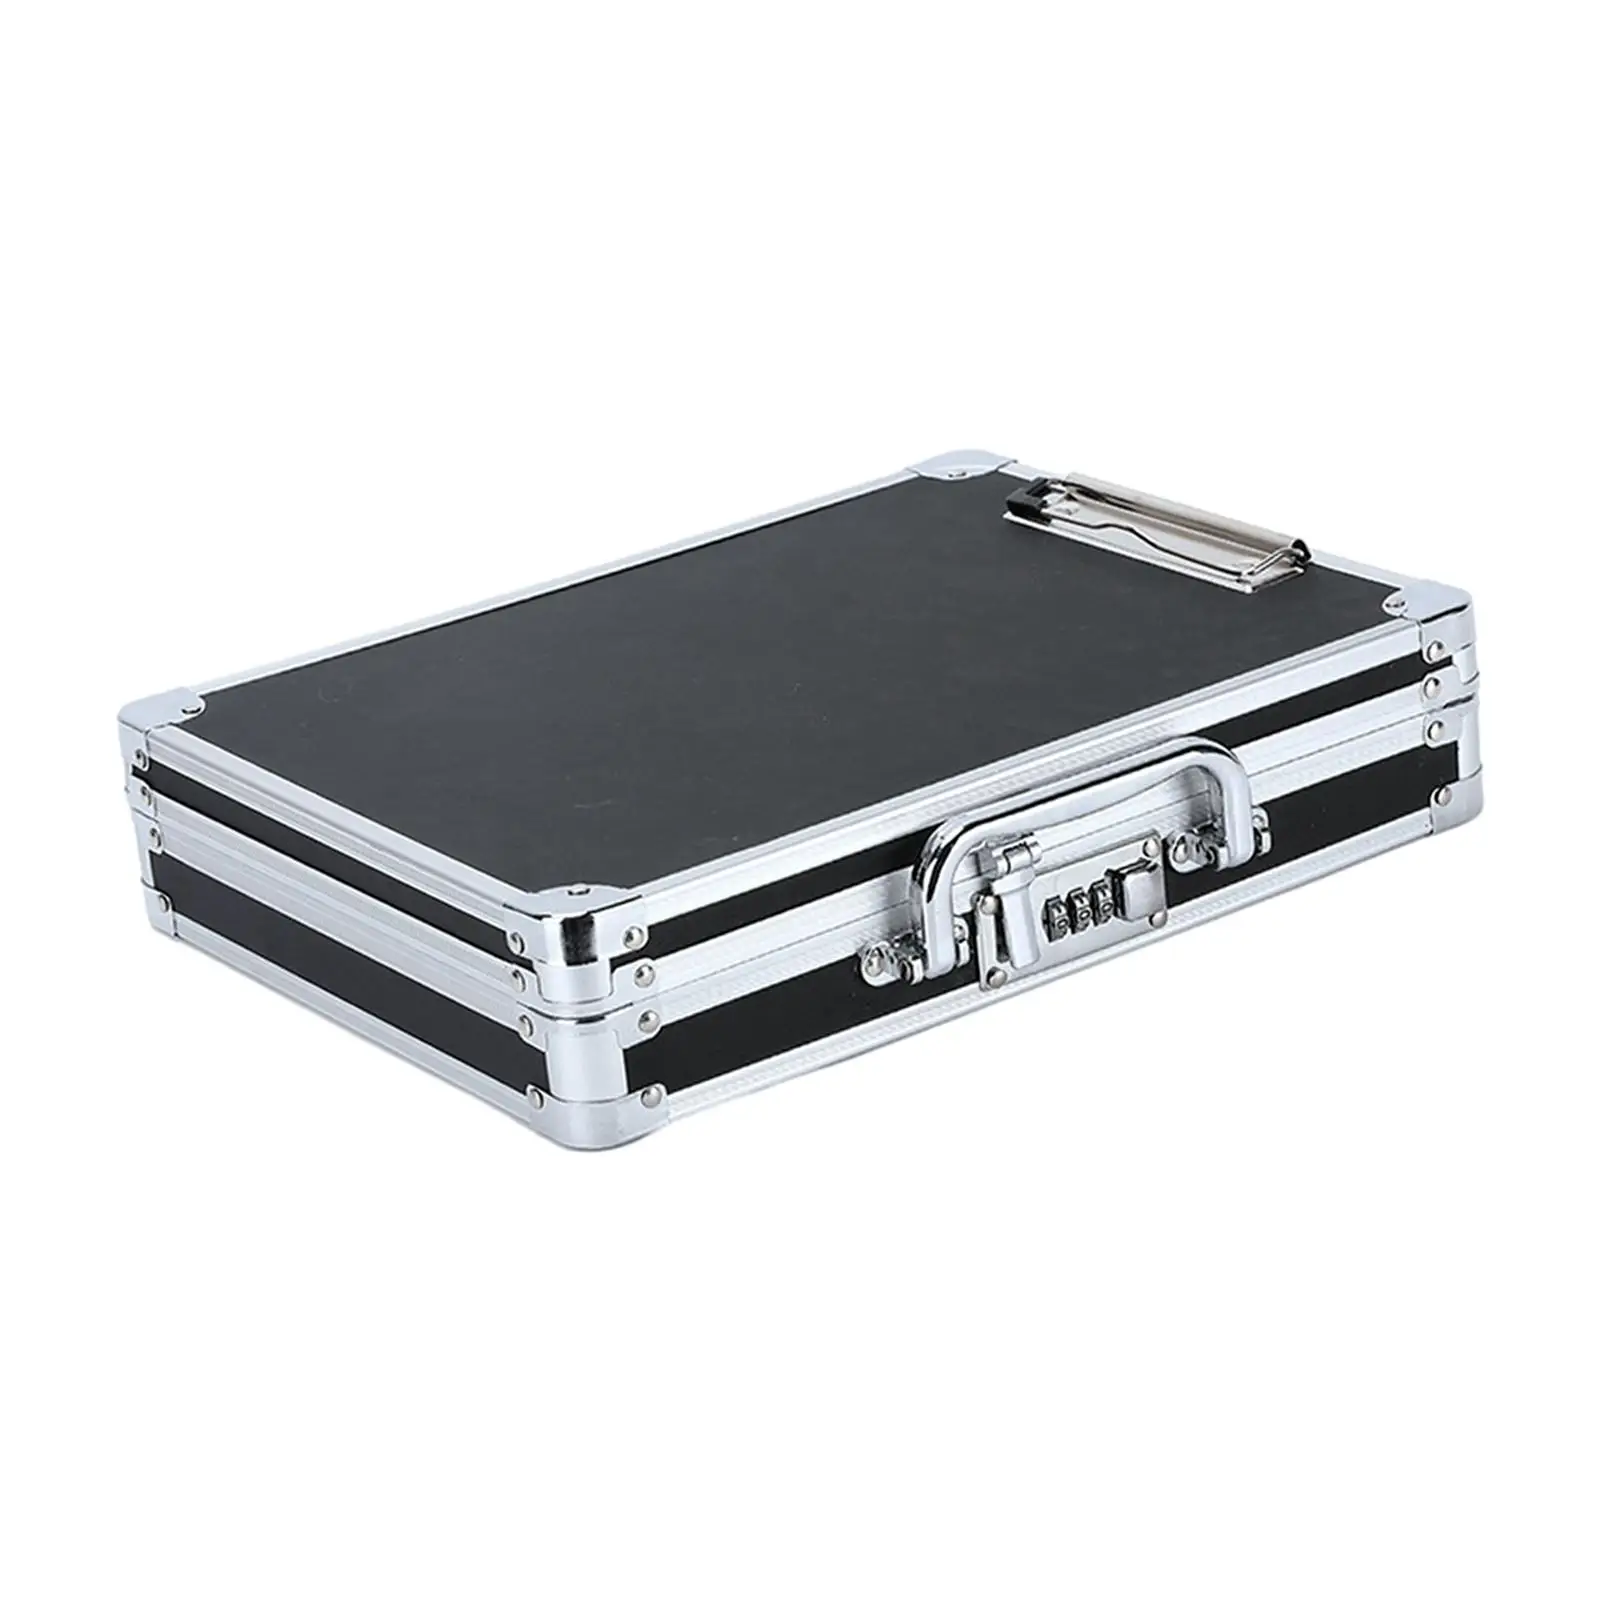 Aluminum Briefcase Hard Briefcases Aluminum Alloy Case for Test Instruments Cameras Tools Parts and Accessories Outdoor Travel